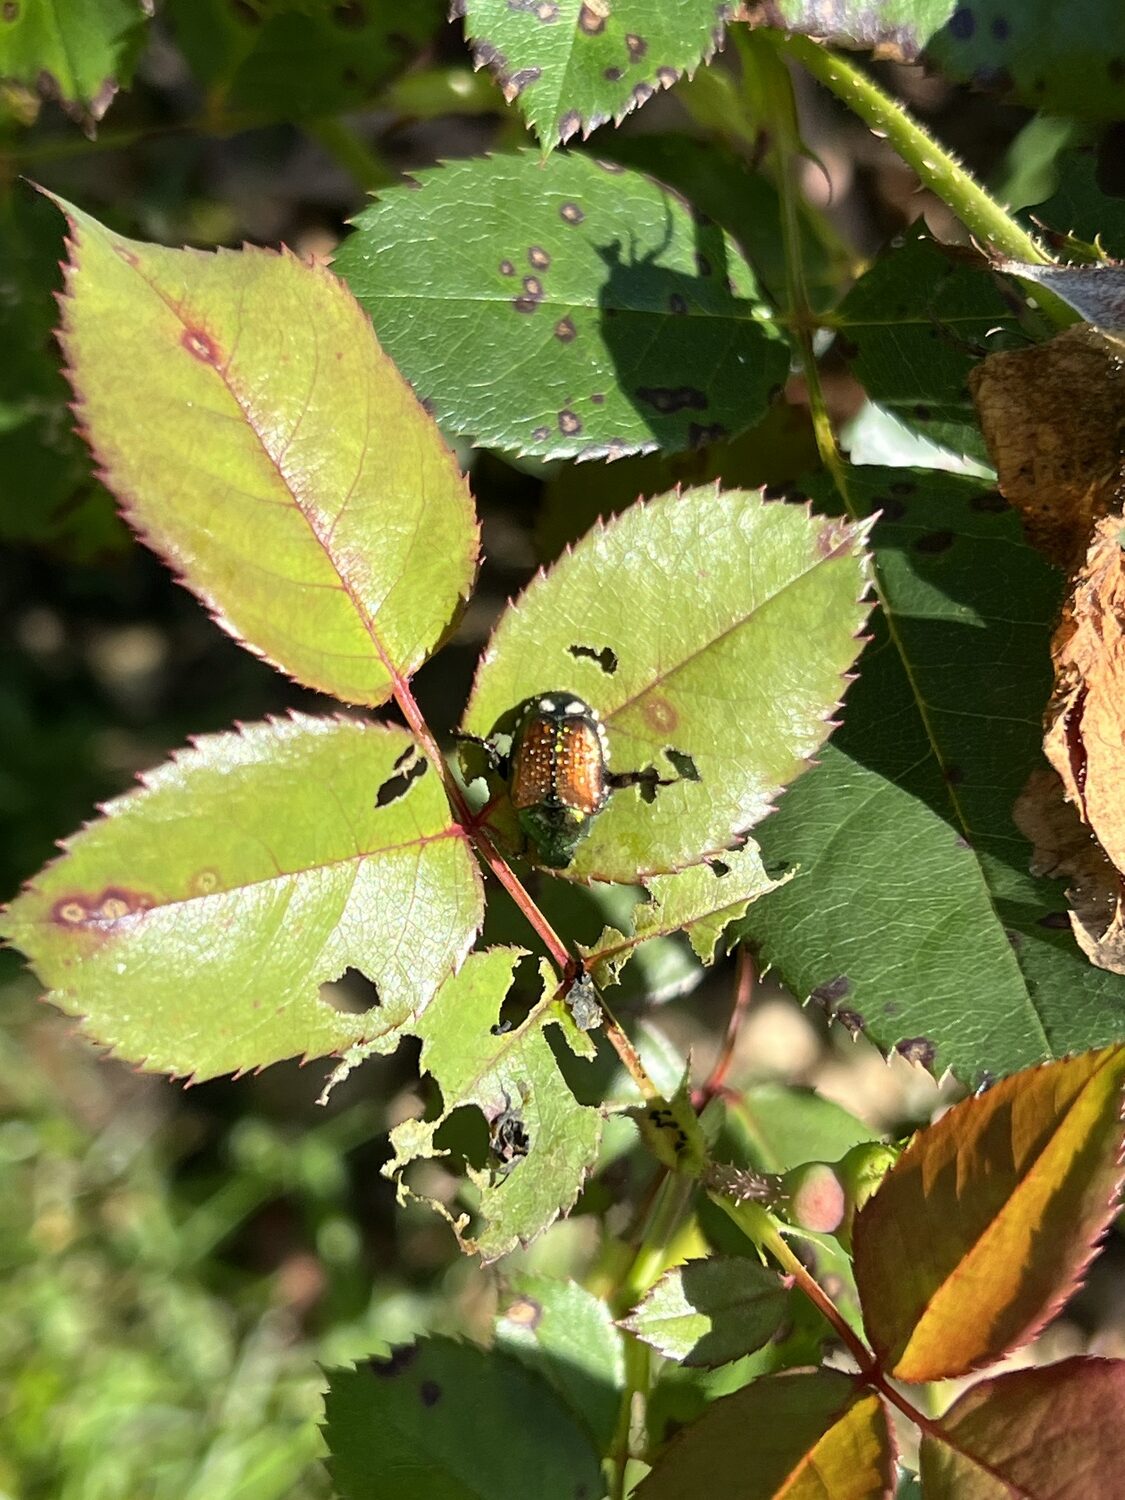 Japanese beetles usually feed on roses (here) and hibiscus plants for about five weeks beginning around July Fourth.  This feeding and damage was taking place on October 8.  Climate change?
ANDREW MESSINGER